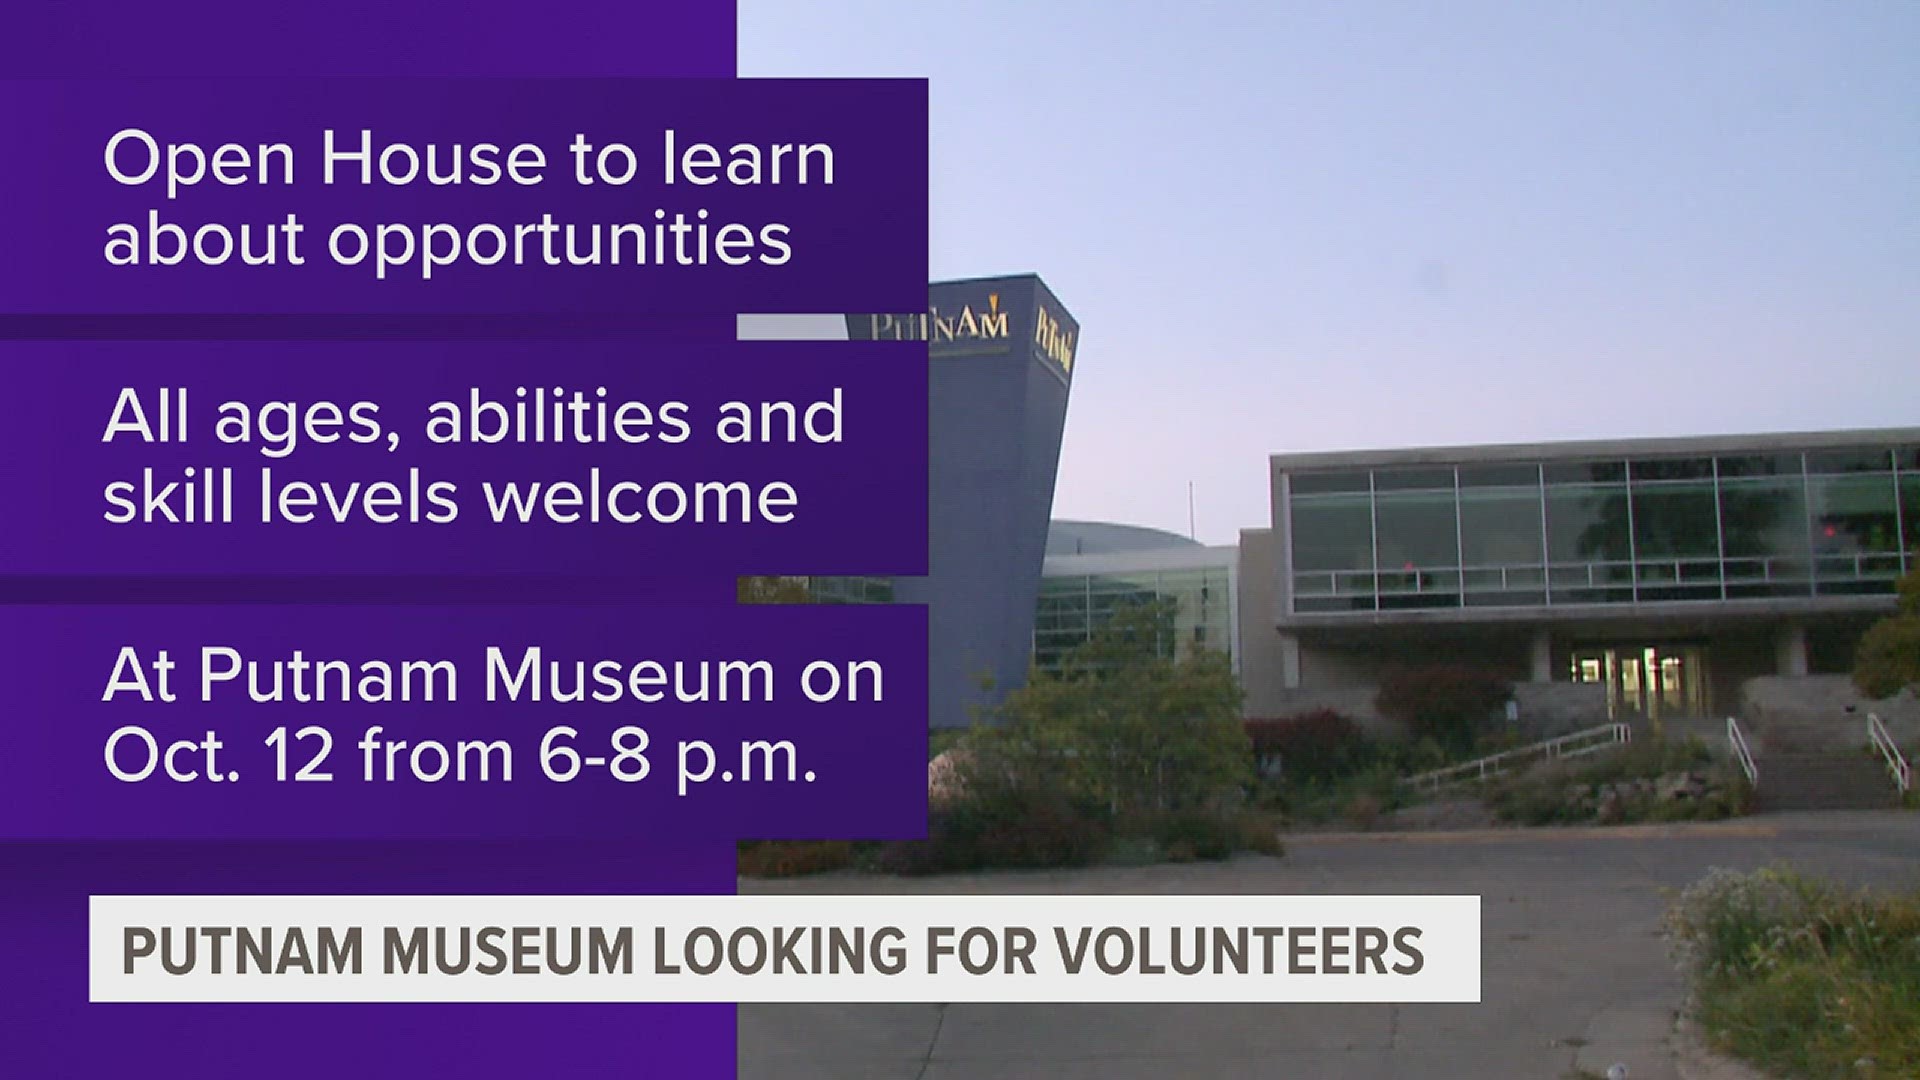 People interested in attending will be treated to information about how to become a volunteer, docent or intern.